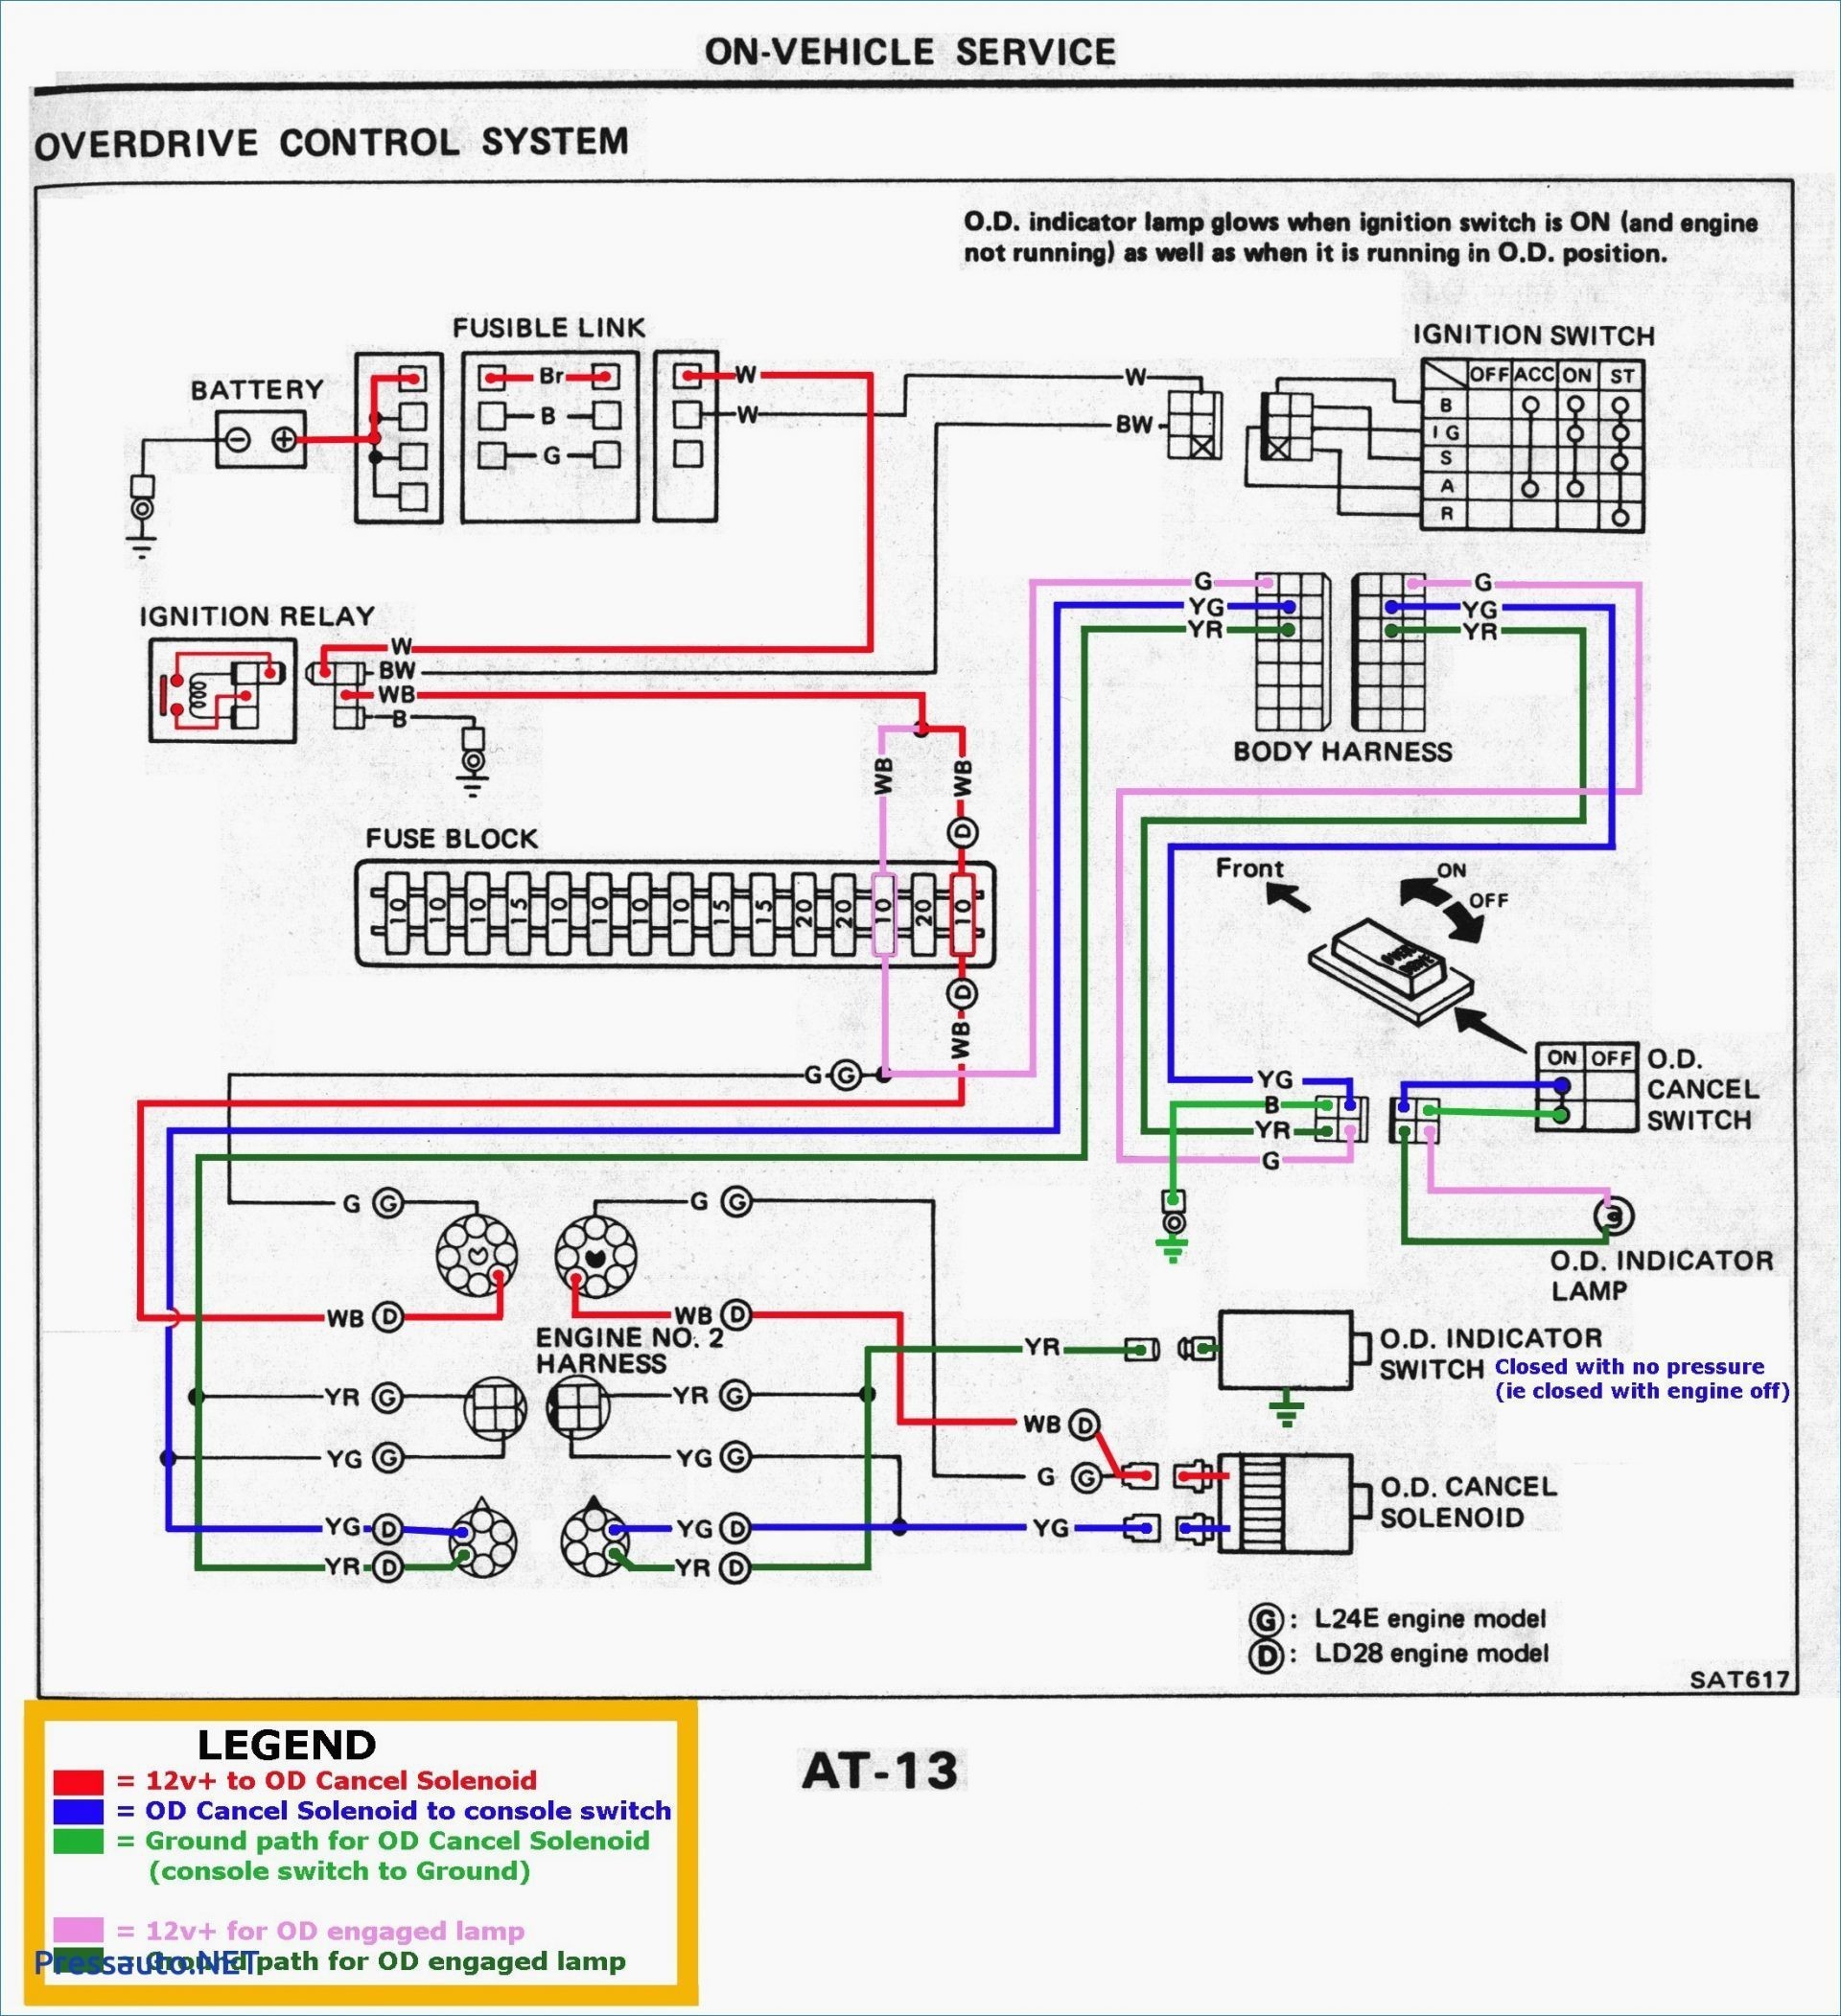 Car Signal Light Wiring Diagram Best Lamp Wiring Diagram • Electrical Outlet Symbol 2018